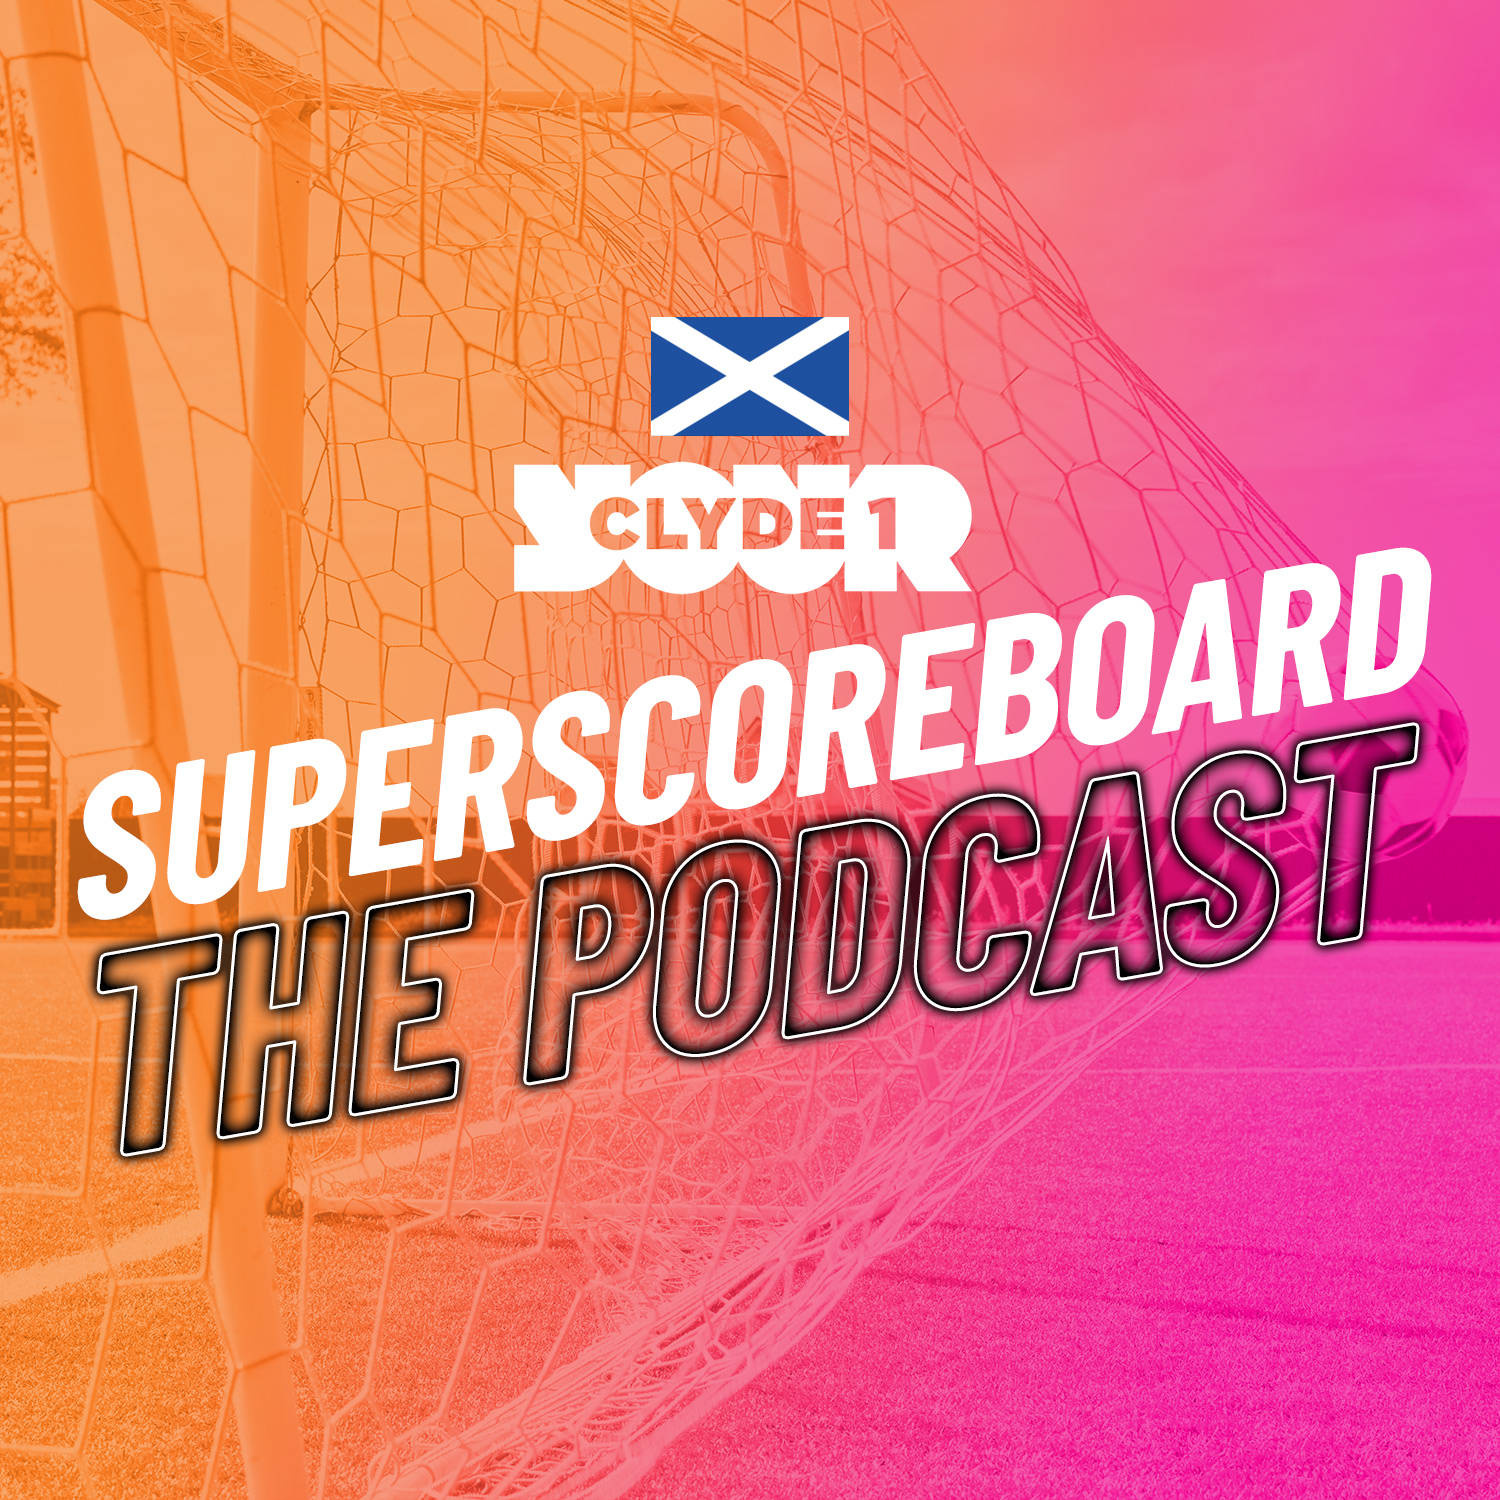 Saturday 27th January Clyde 1 Superscoreboard Part 3